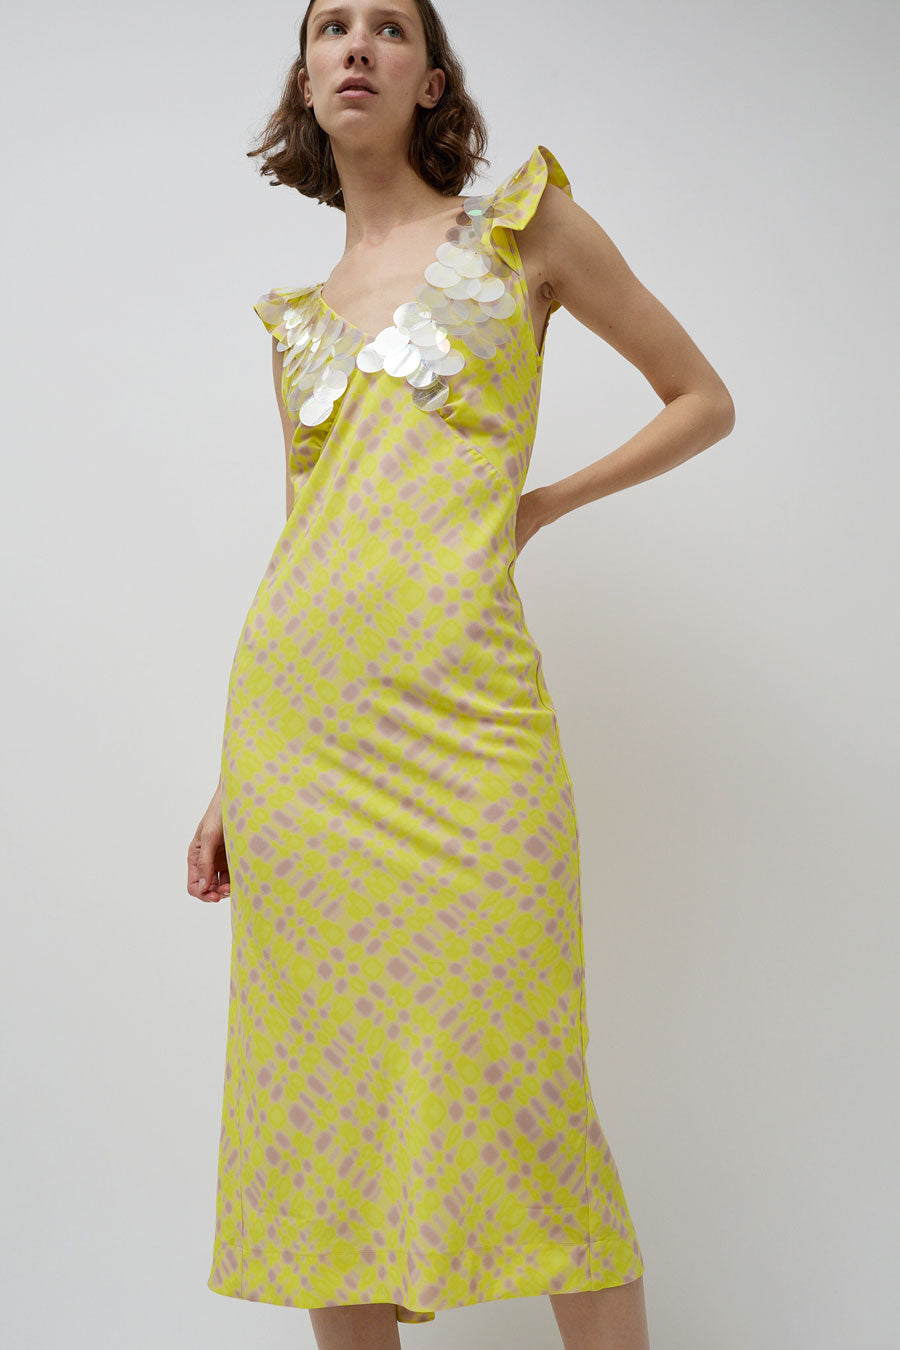 INSHADE V Neck Sequin Dress in Light Yellow Plaid